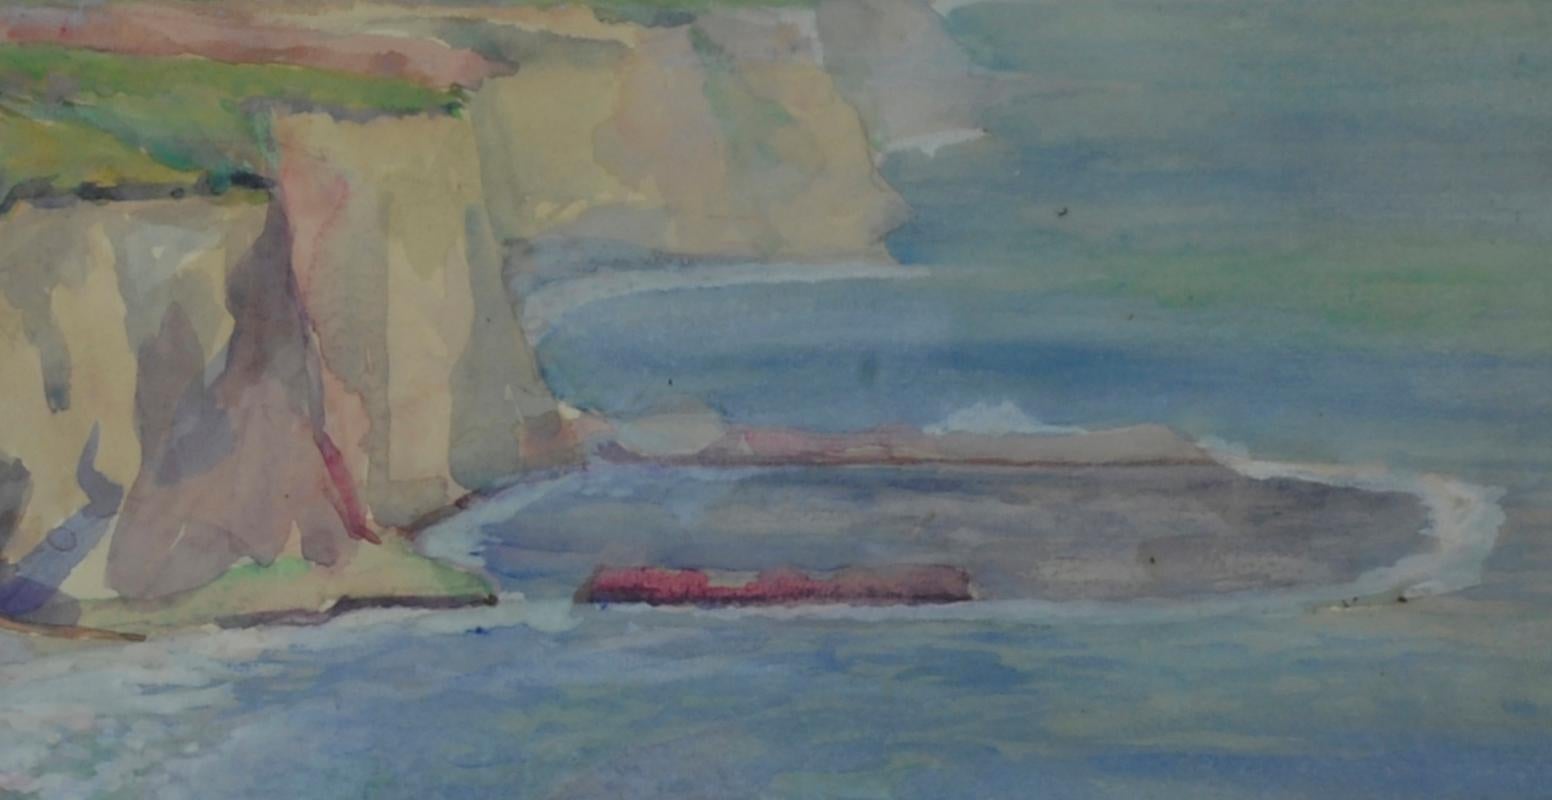 Newport or The Cliffs at Newport - Abstract Impressionist Art by Ruel Crompton Tuttle